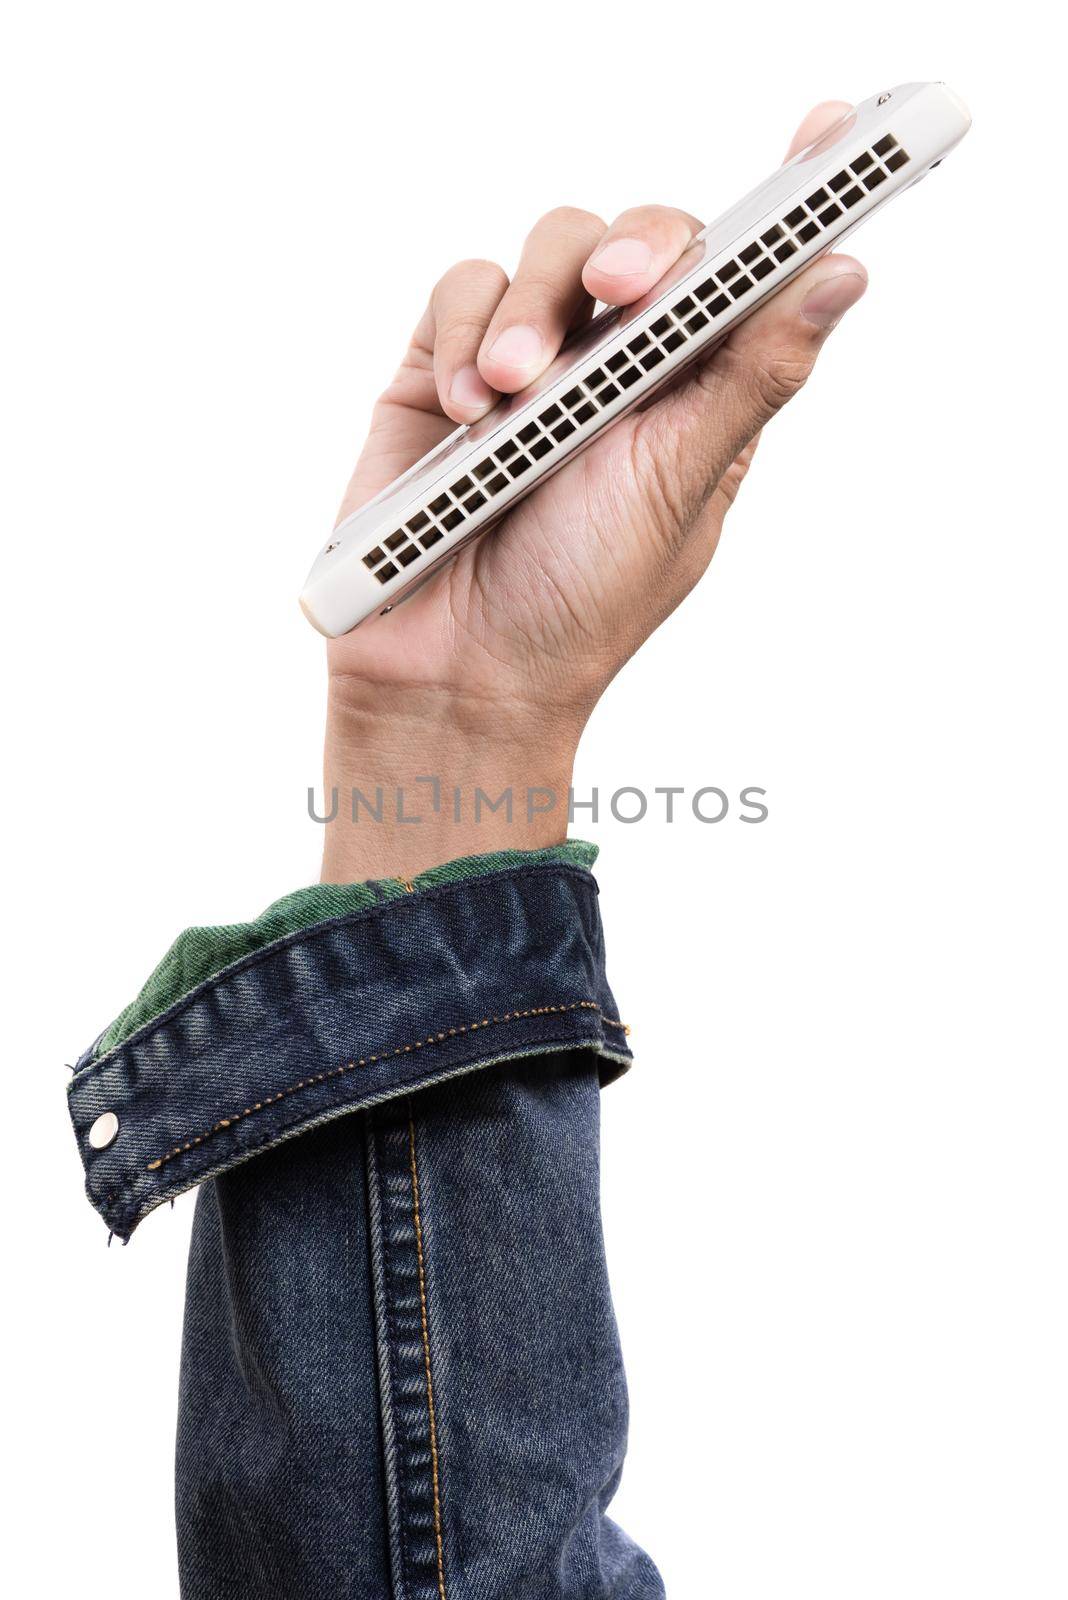 isolate harmonica in musician hand over white background